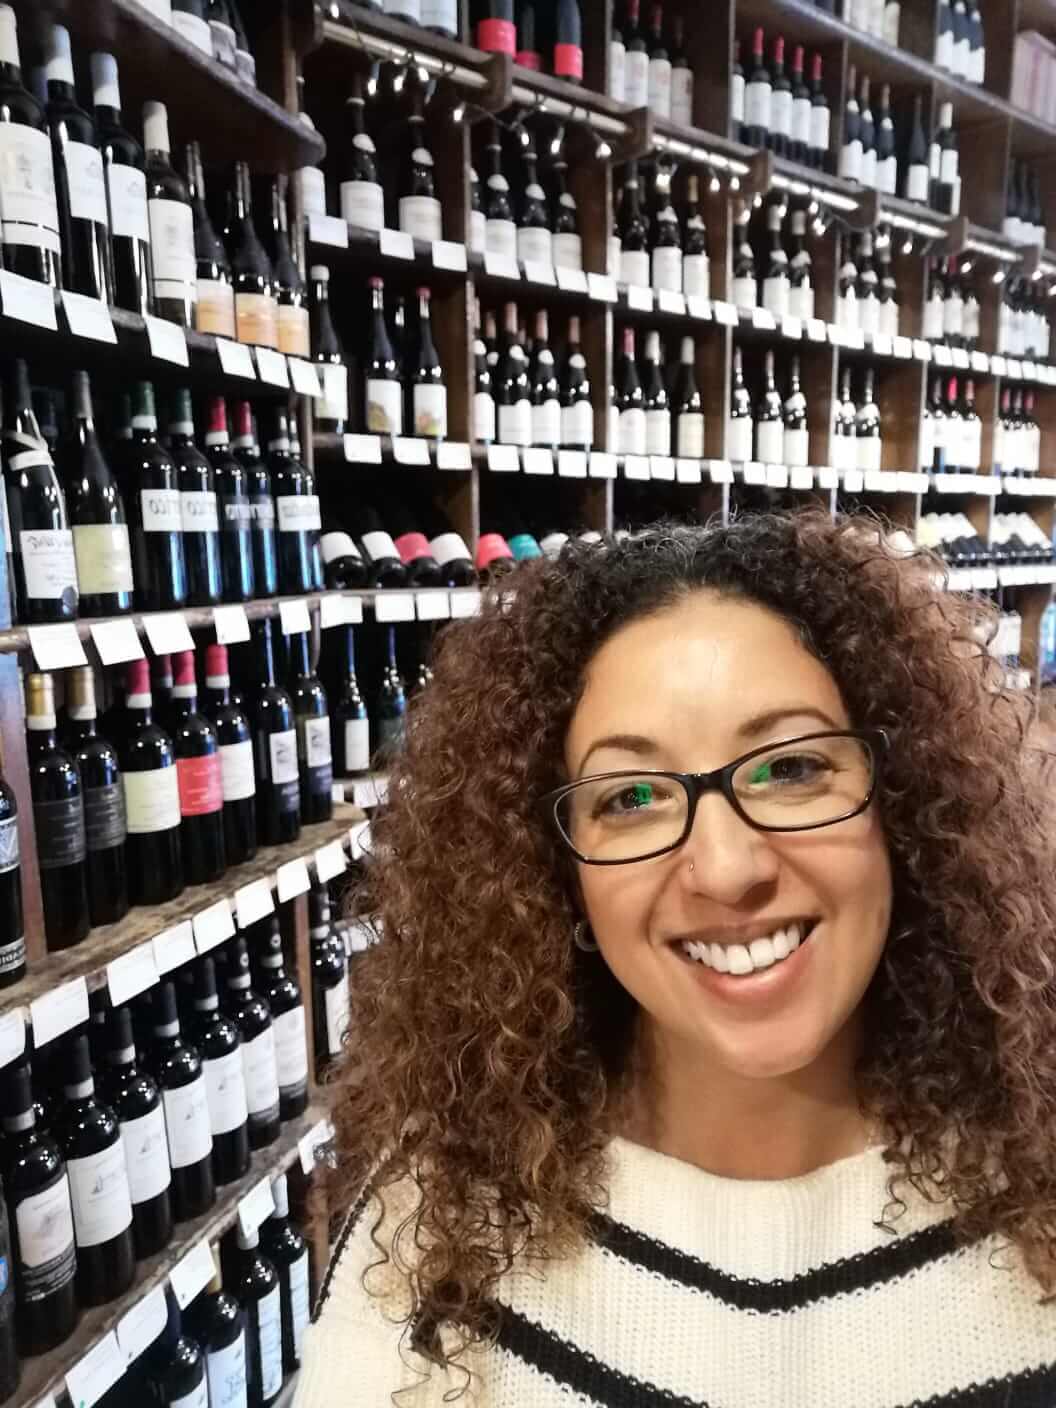 Natalie Sippers & spitters in wine shop